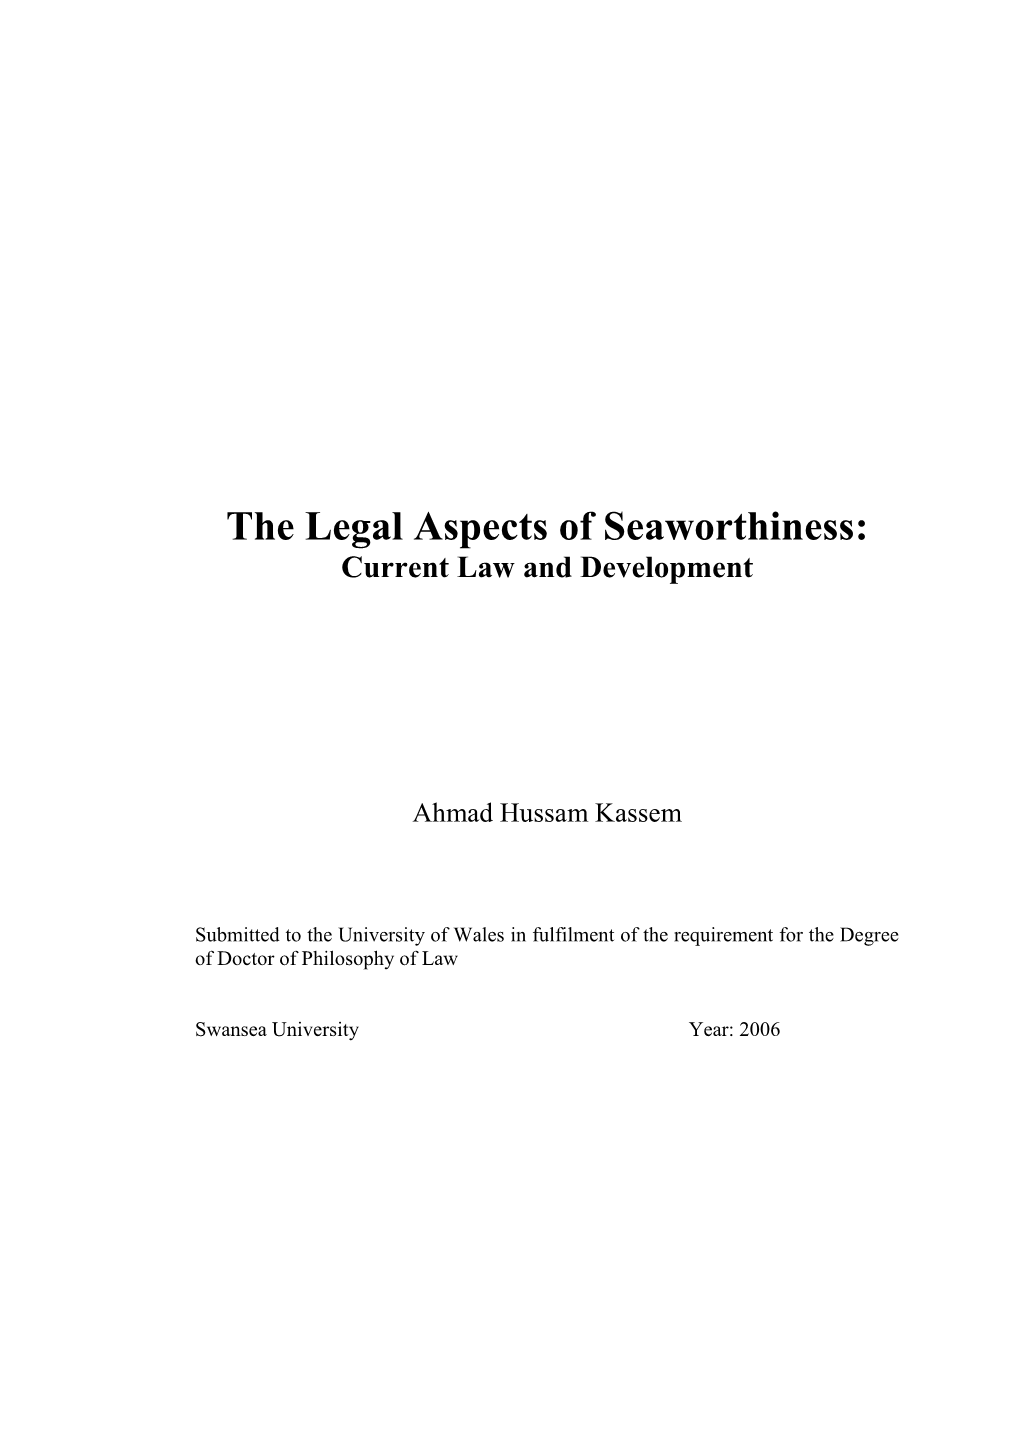 The Legal Aspects of Seaworthiness: Current Law and Development